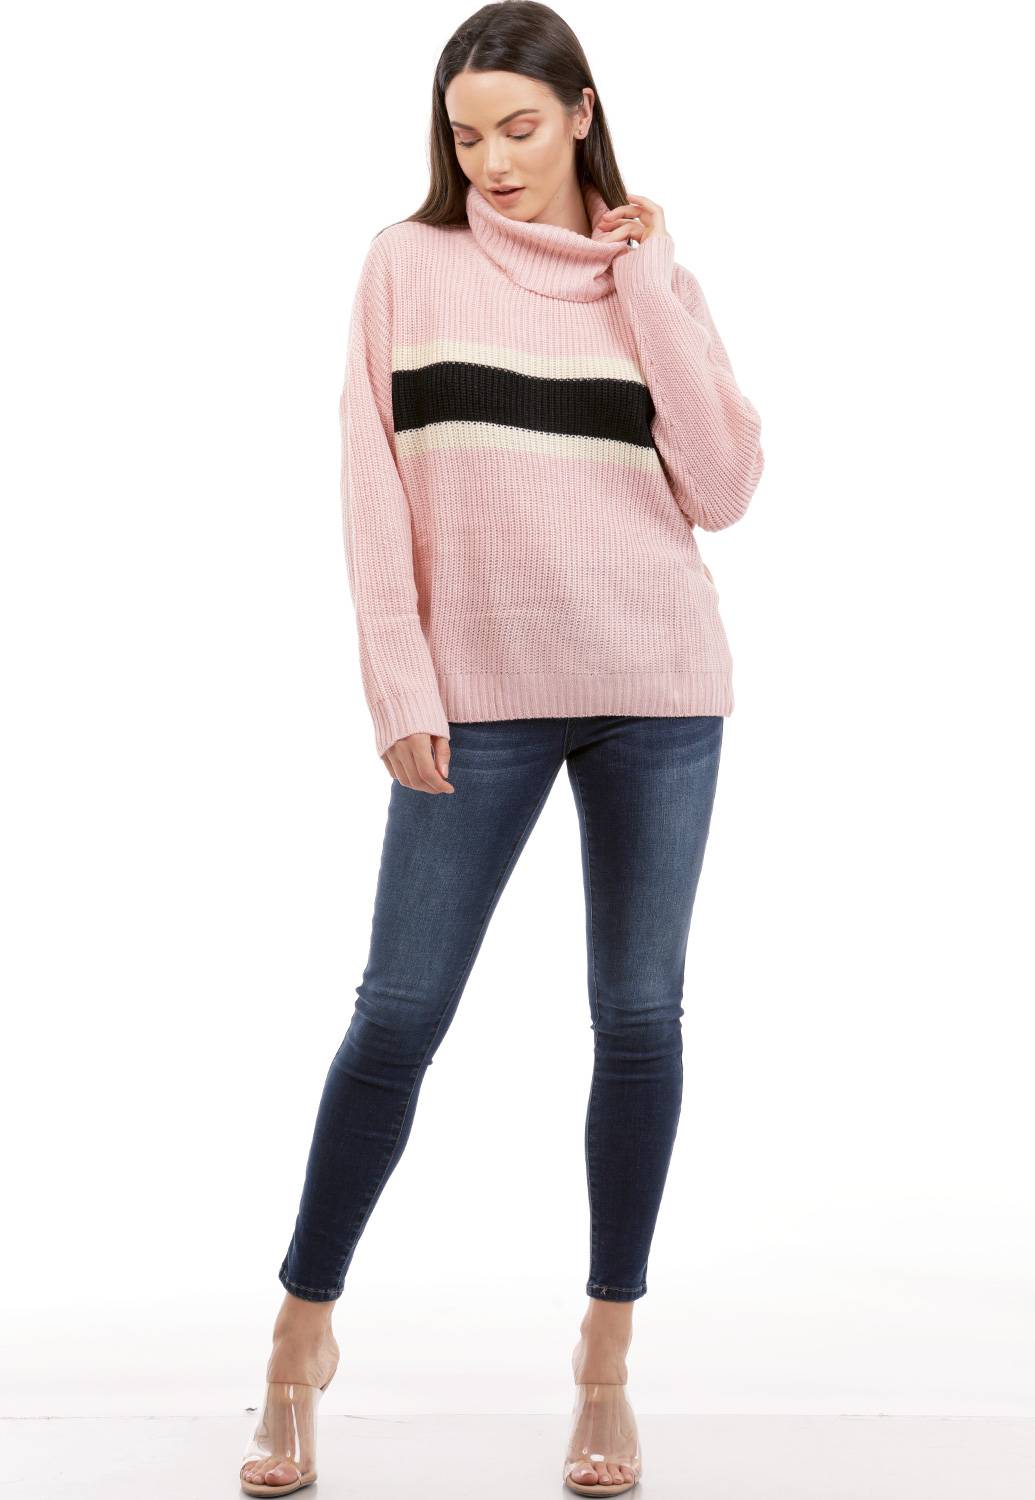 Colorblocked Knit Sweater